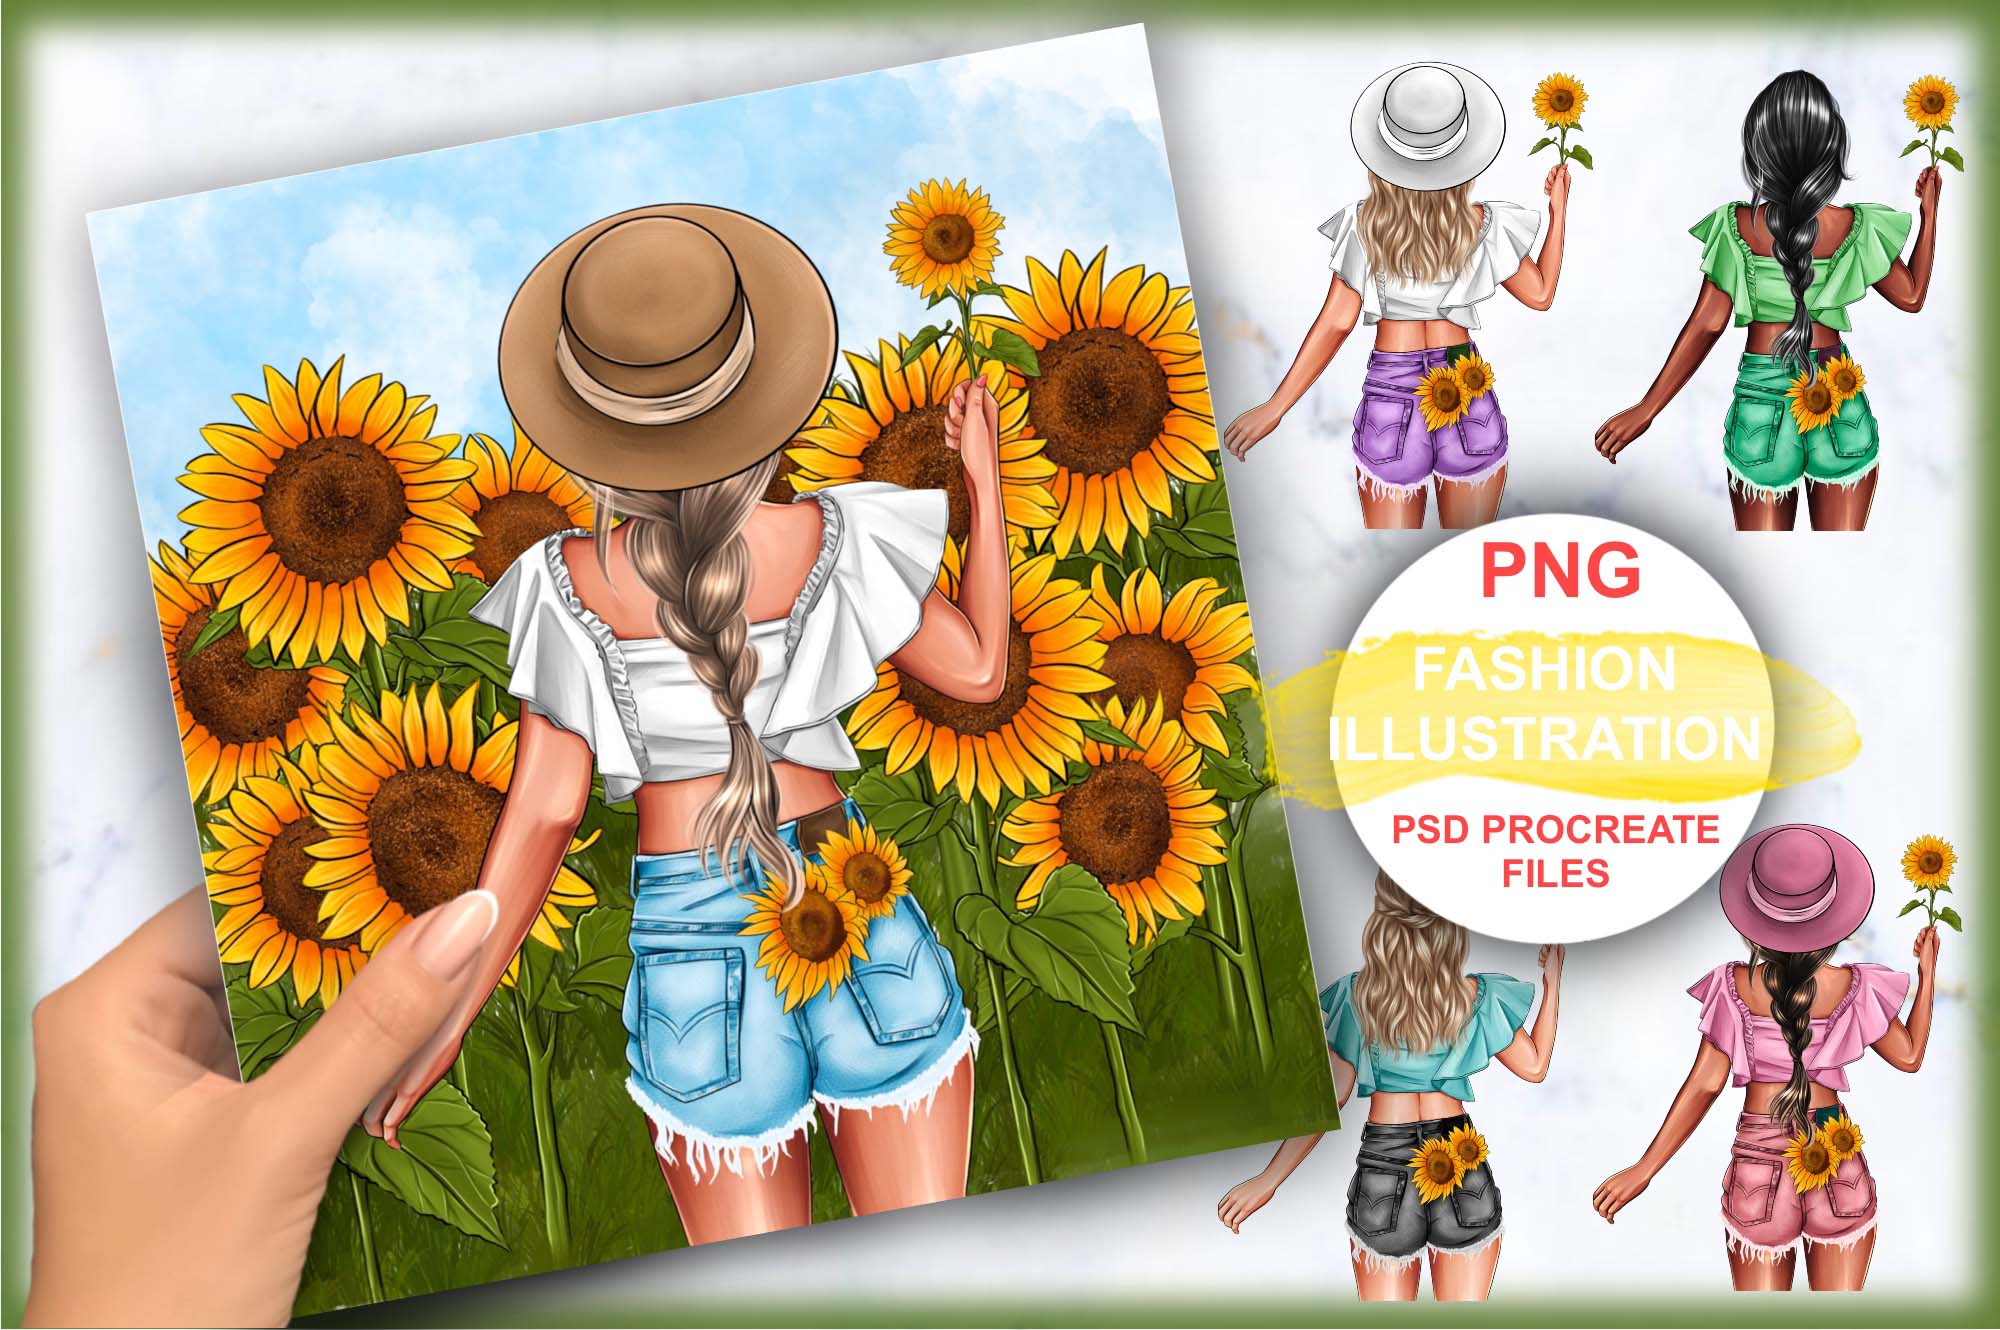 Fashionable Girl Sunflowers Clipart Facebook Image.